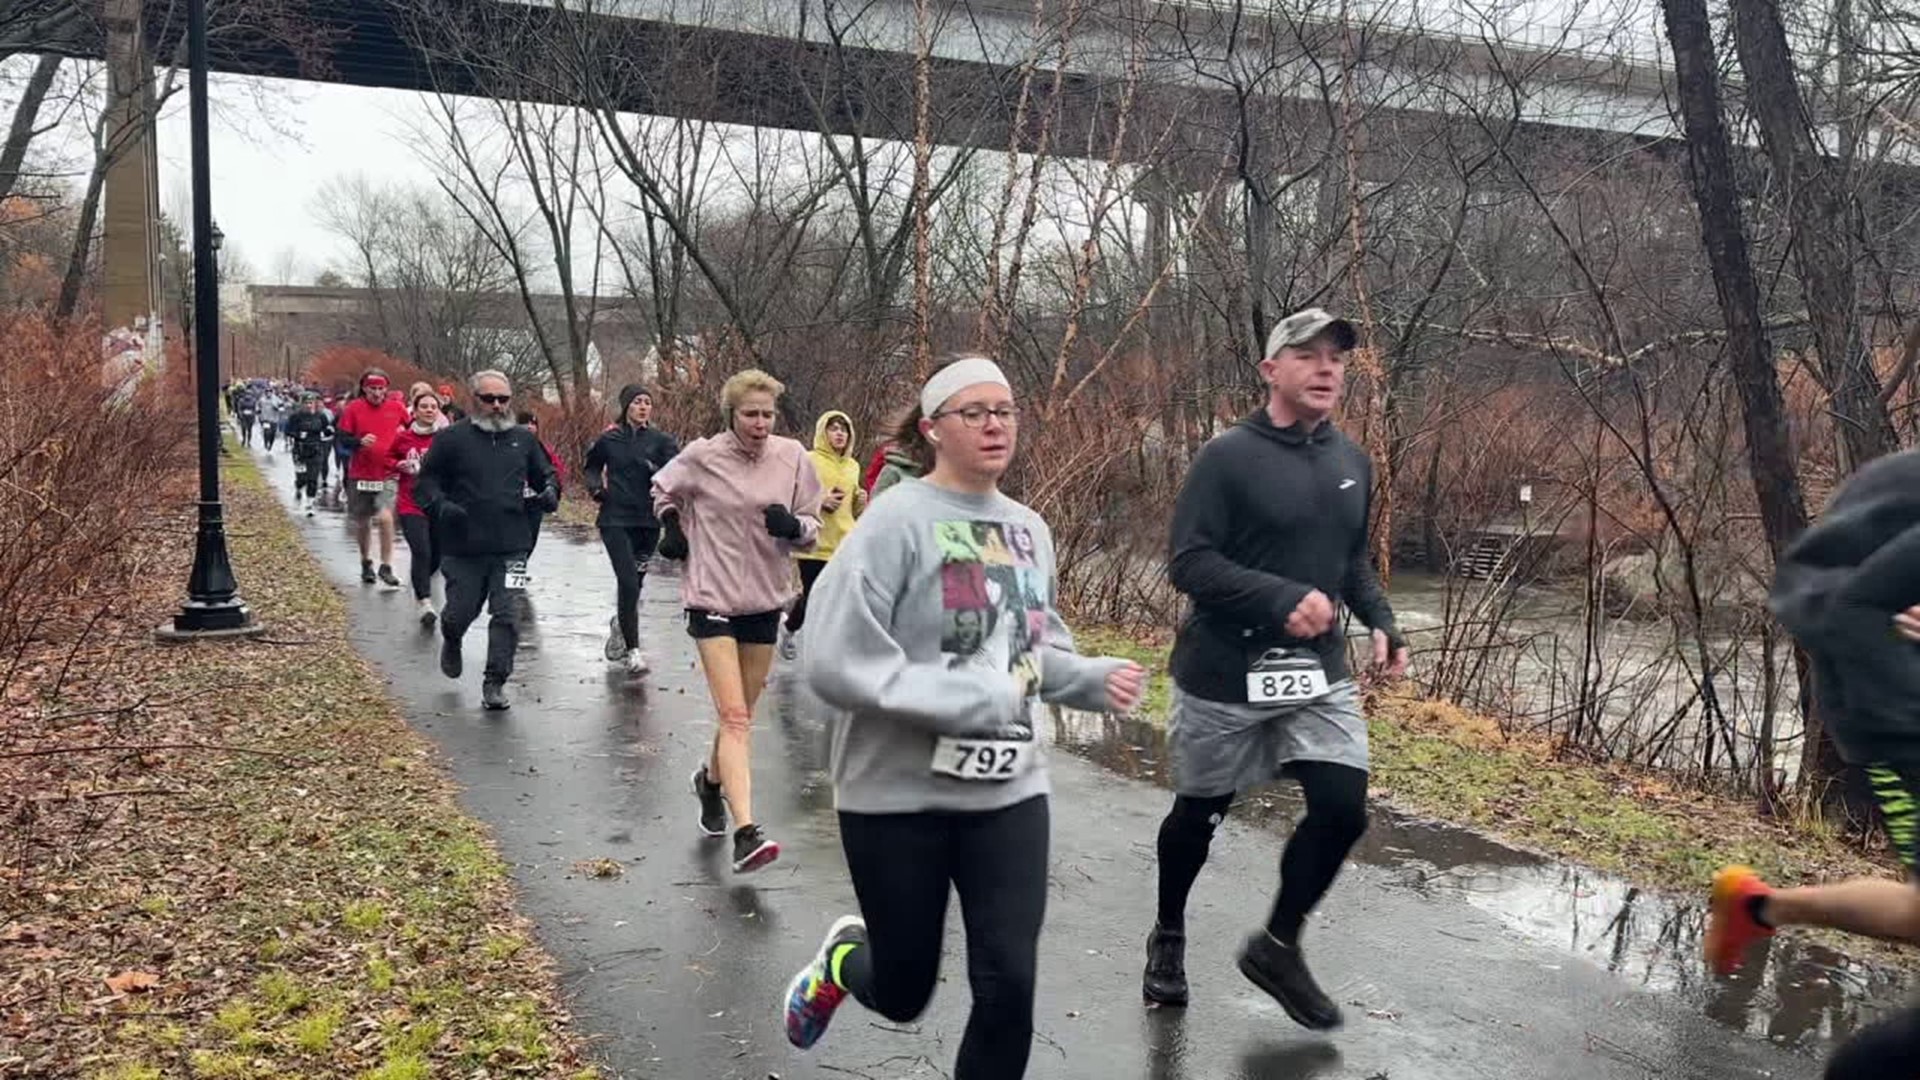 Hundreds of runners came together for a good cause Saturday morning to take part in the annual Shiver by the River races.